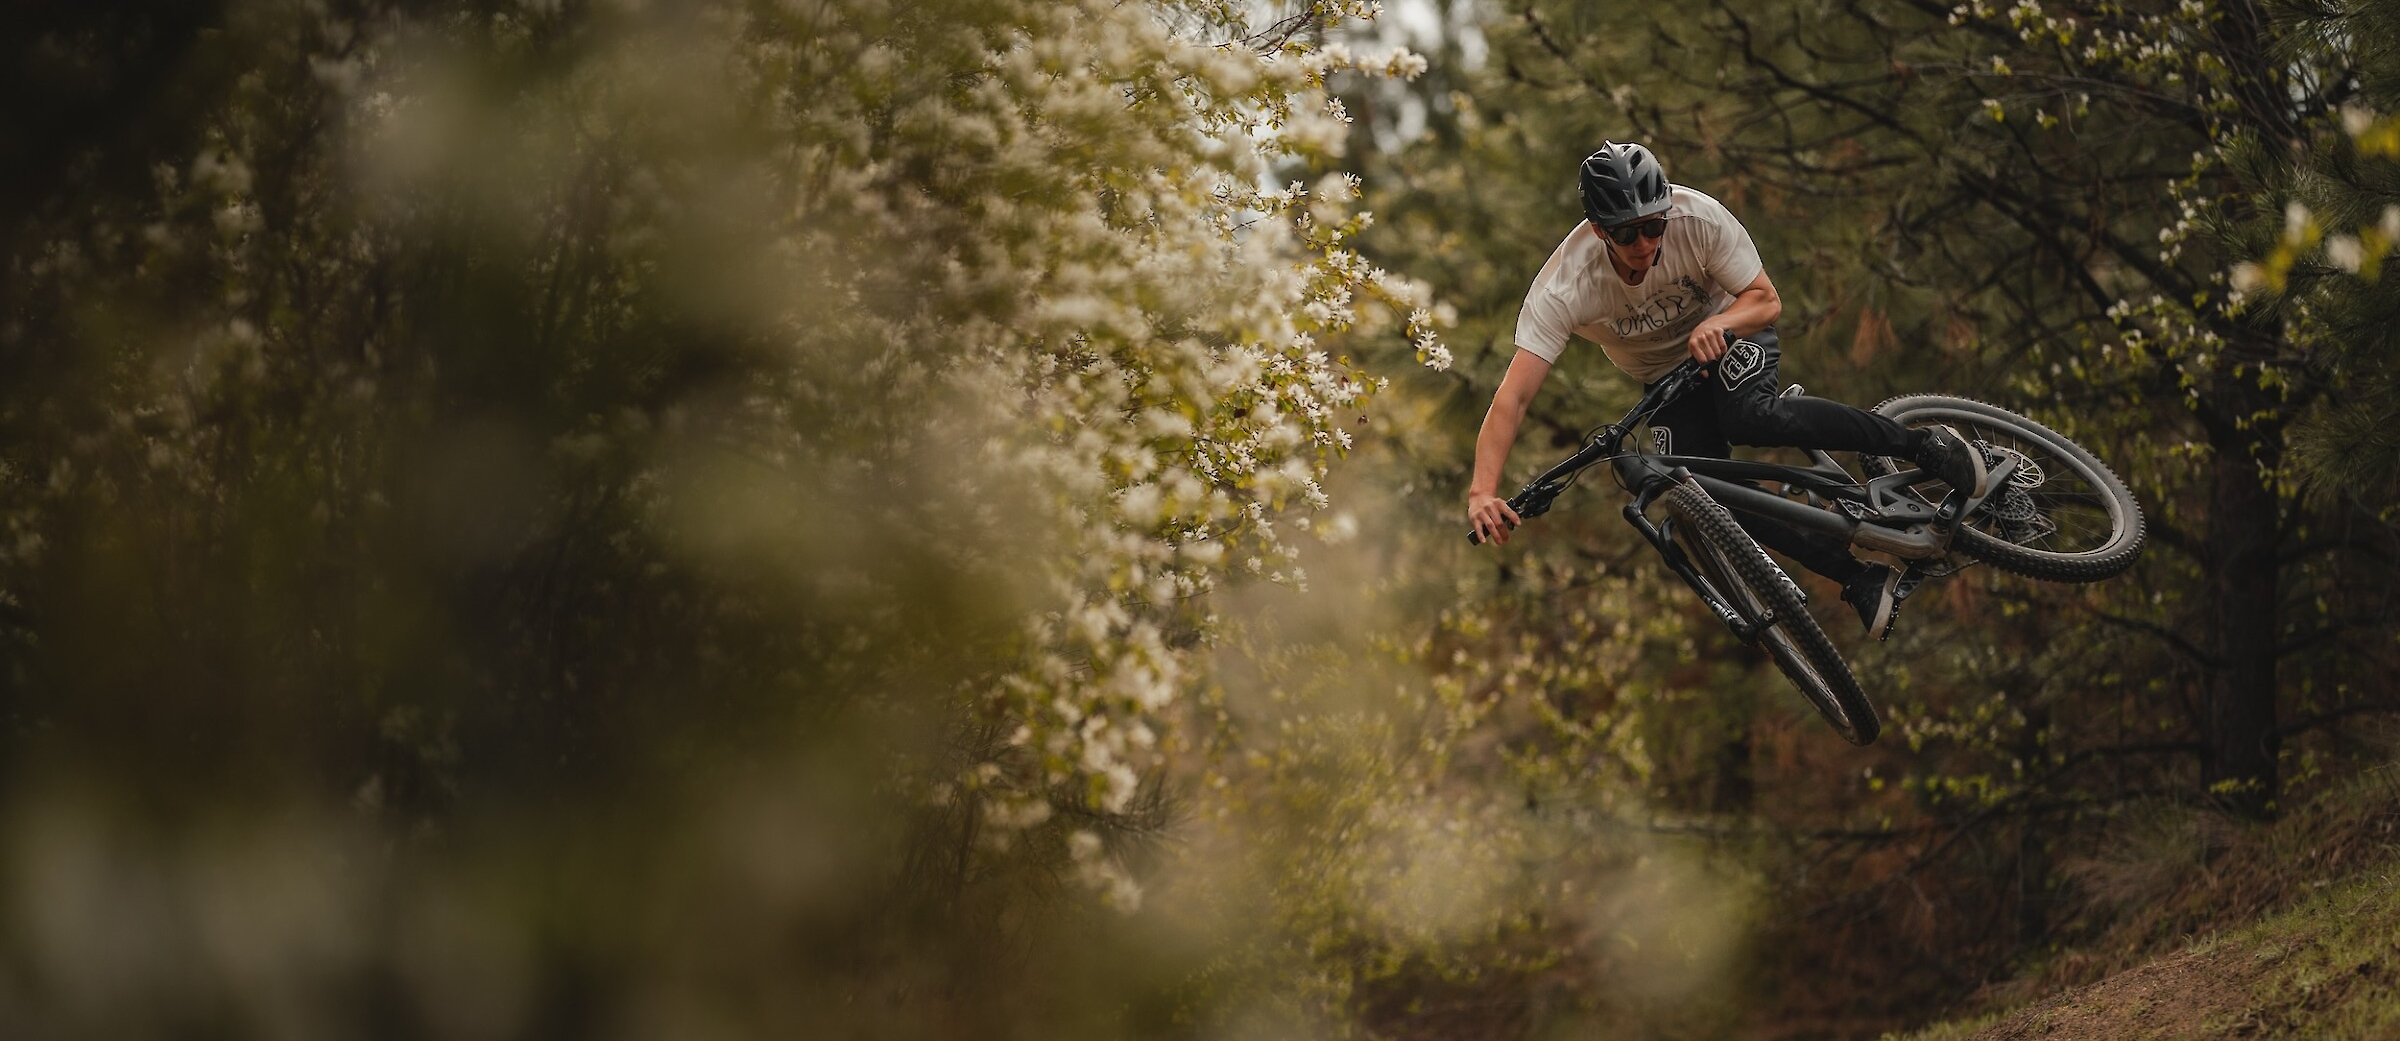 A mountain biker getting air off a jump surrounded by spring flowers in Kamloops, British Columbia.